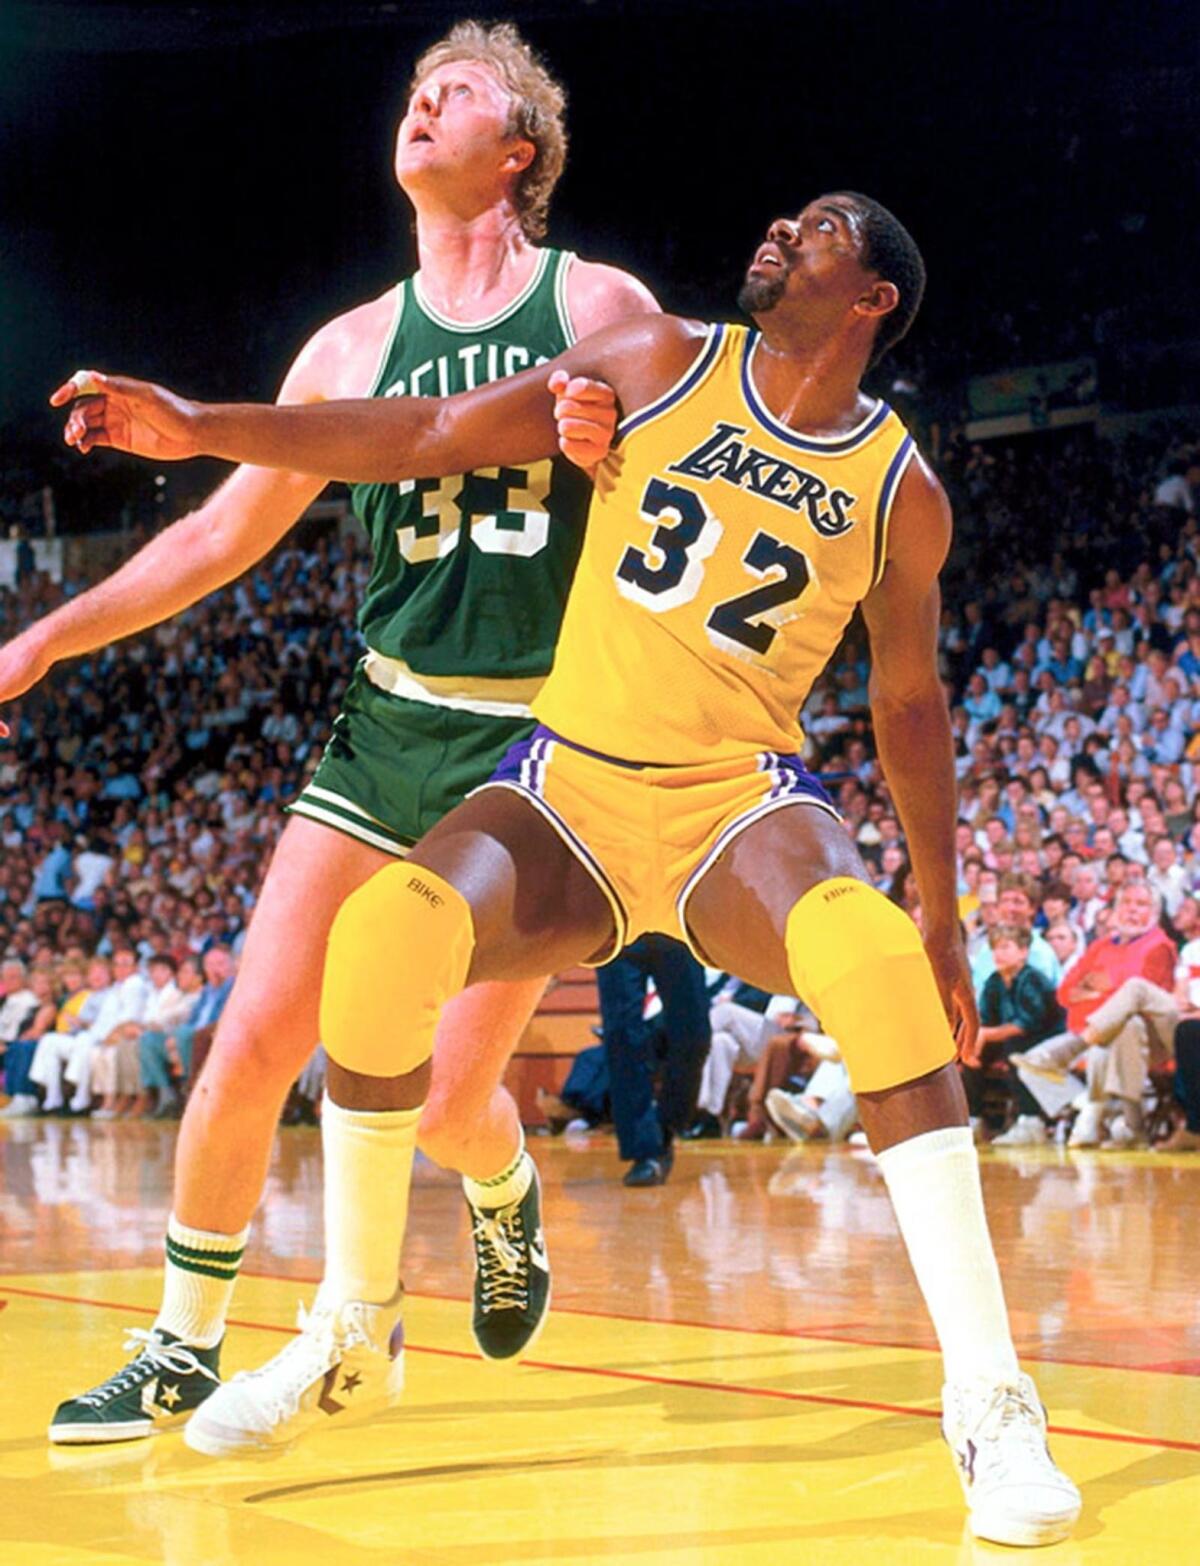 Magic Johnson battles for position against Larry Bird during a 1984 game at the Great Western Forum in Inglewood.